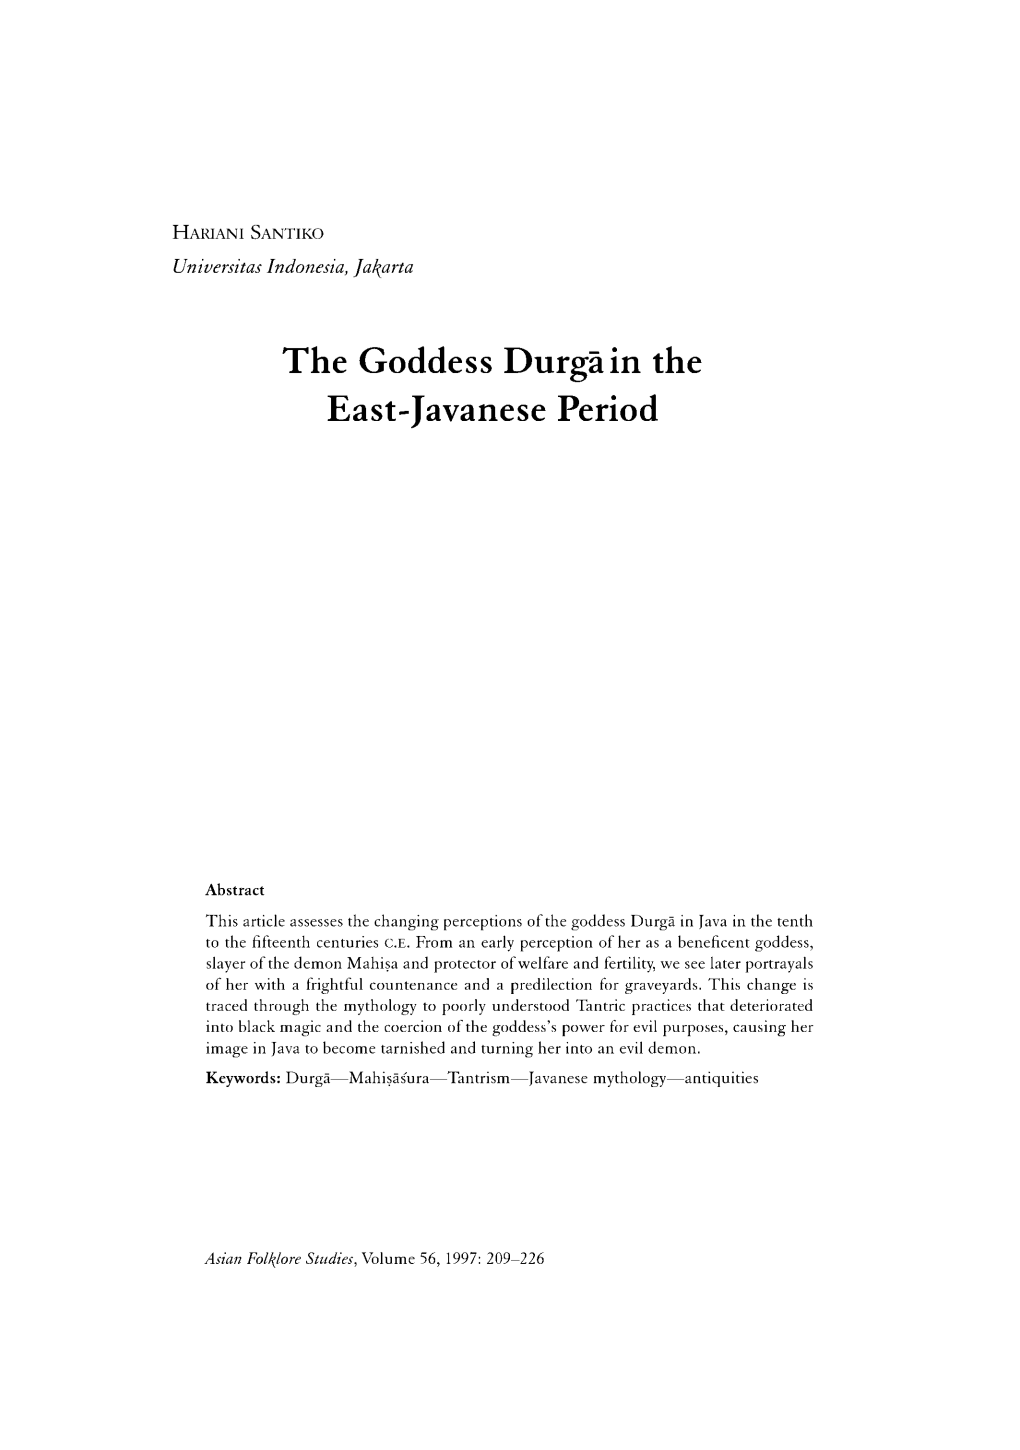 The Goddess Durga in the East-Javanese Period